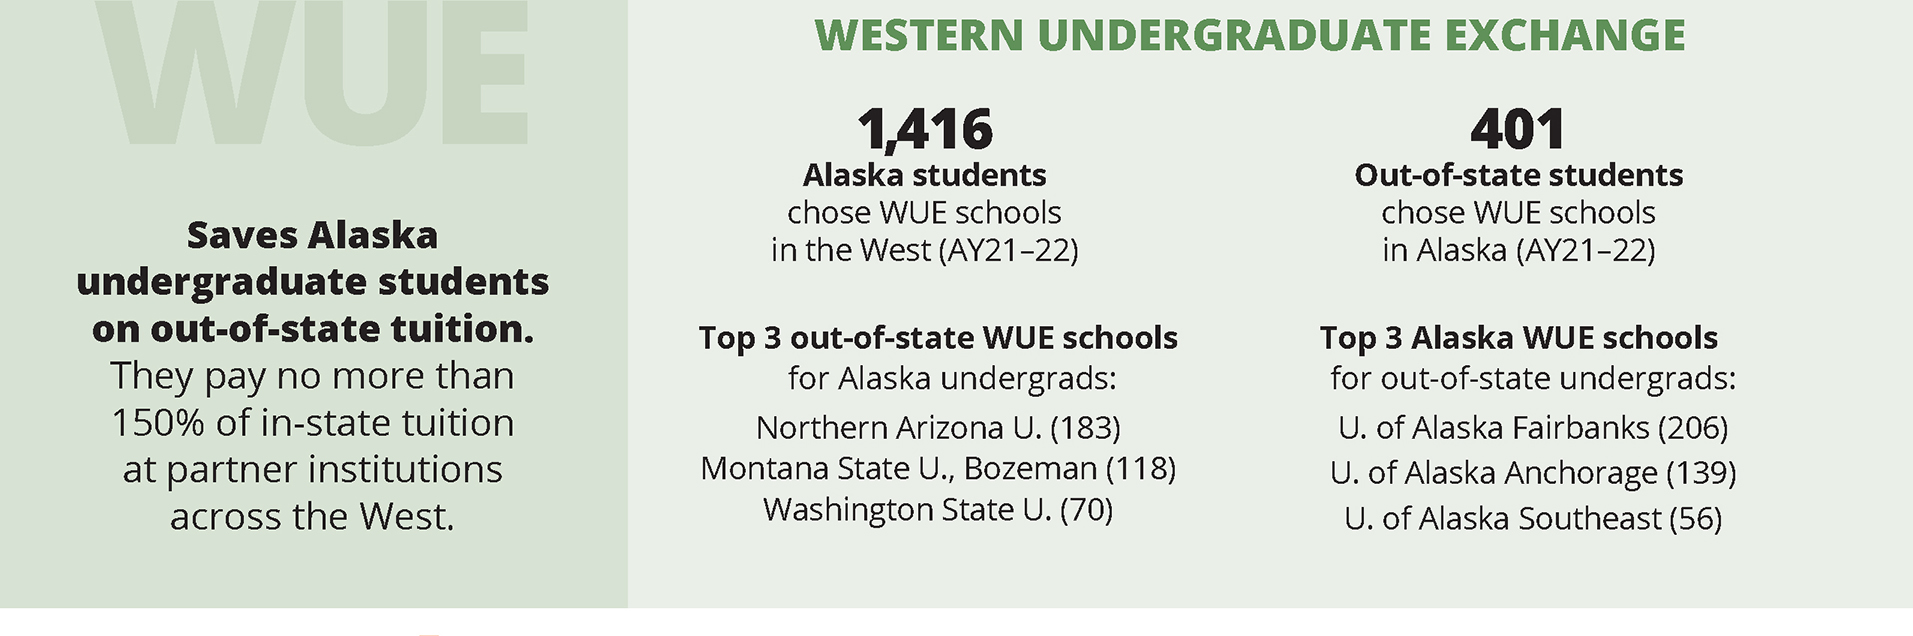 Infographic on Alaska Western Undergraduate Exchange data. Details of infographic listed below.